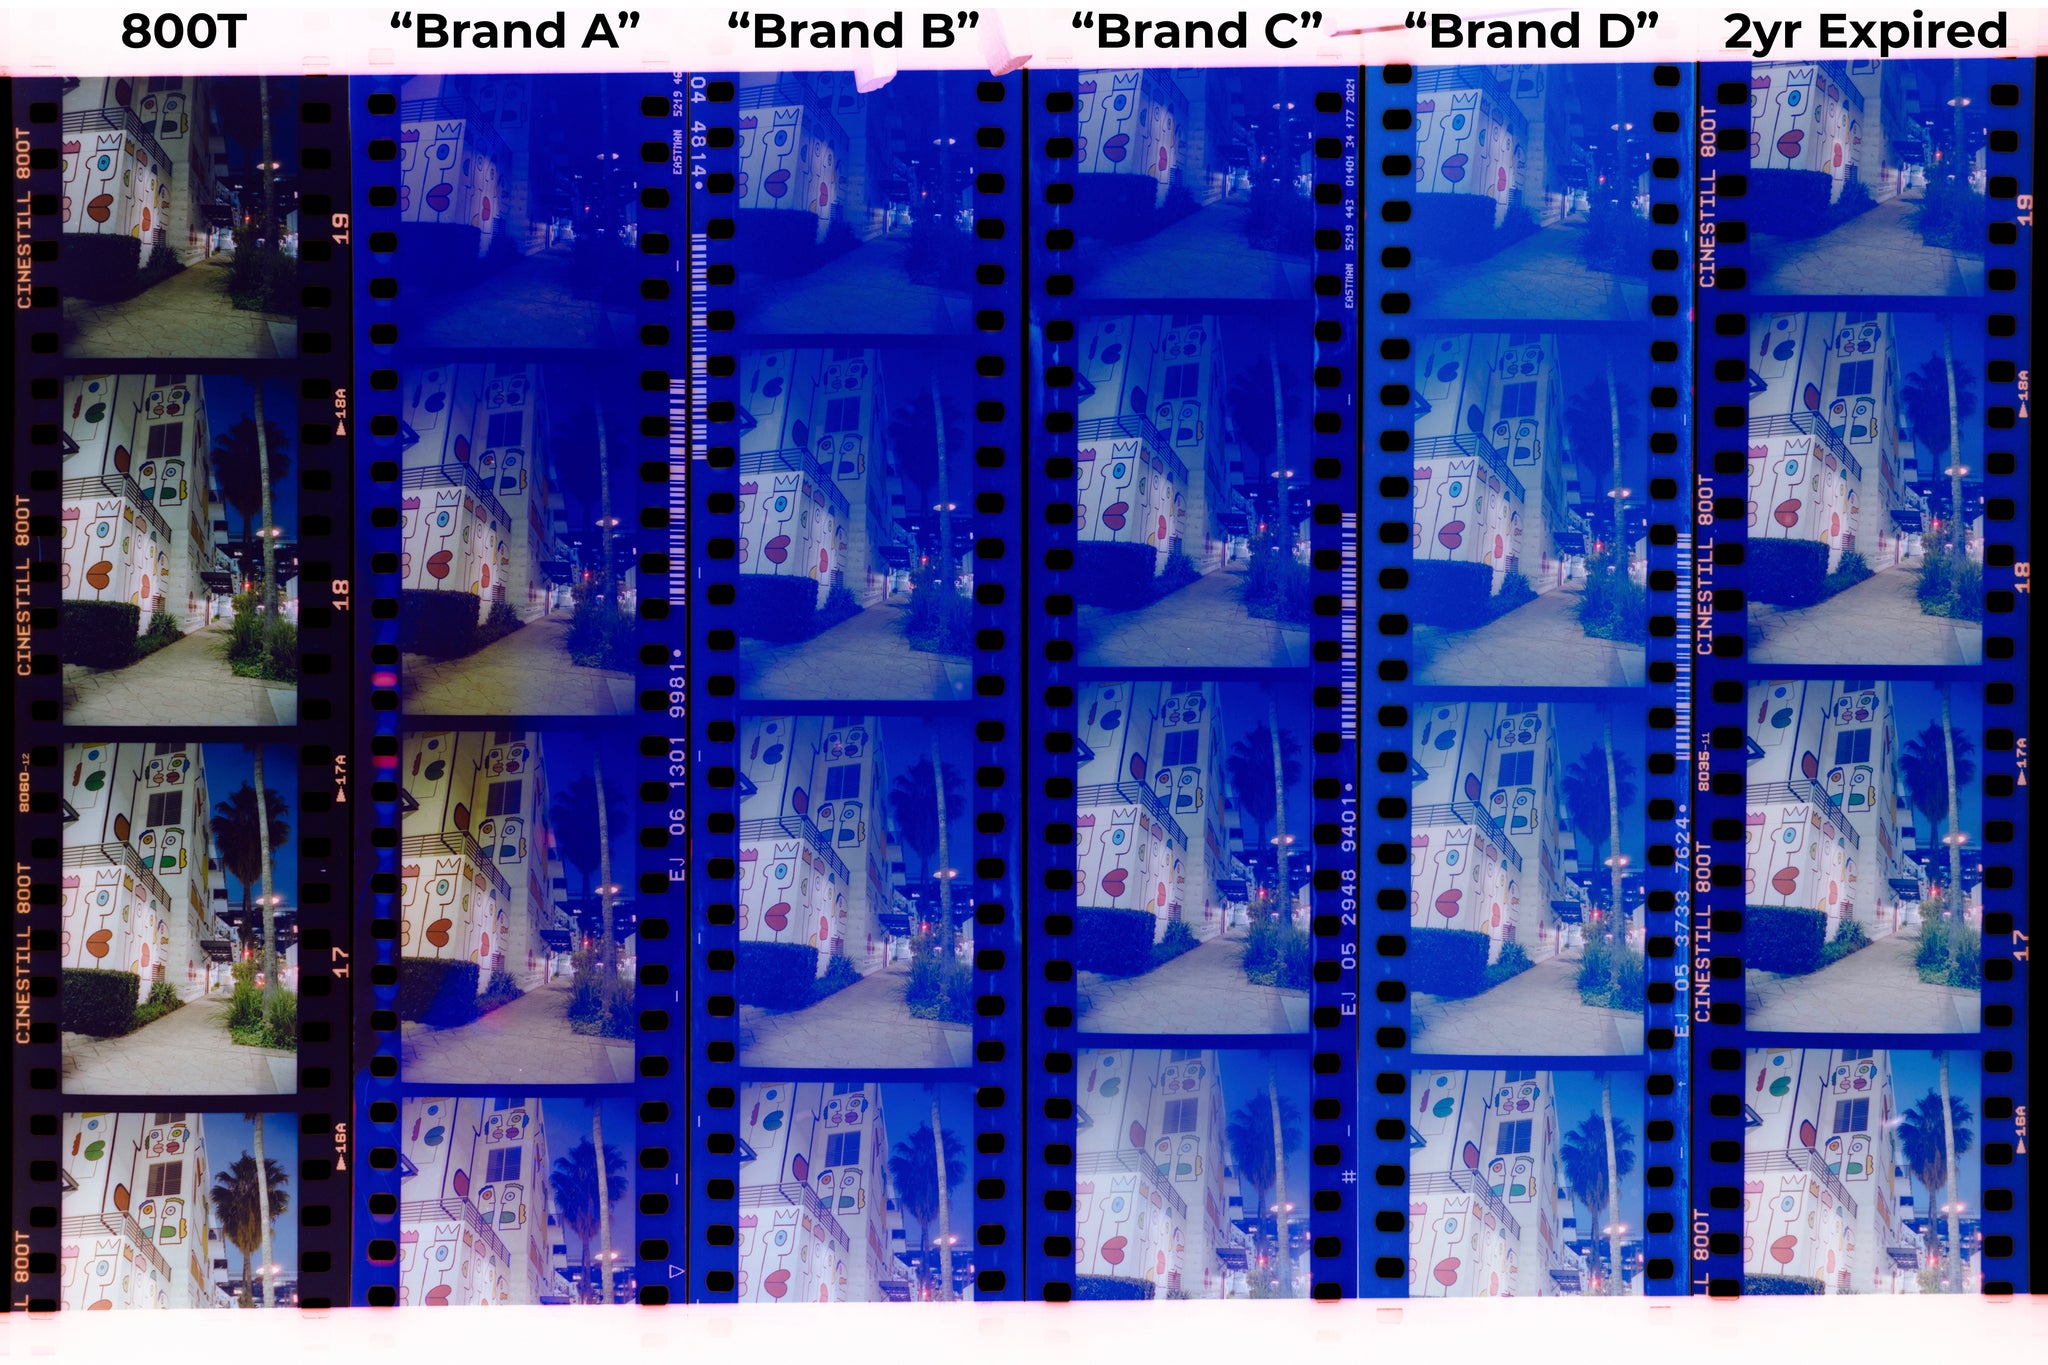 Samples scanned together on a light table, processed in the same tank with in-date and expired 800T as controls. Most imitations are equally fogged to varying degrees and some are uneven, but all have reduced effective film-speed.